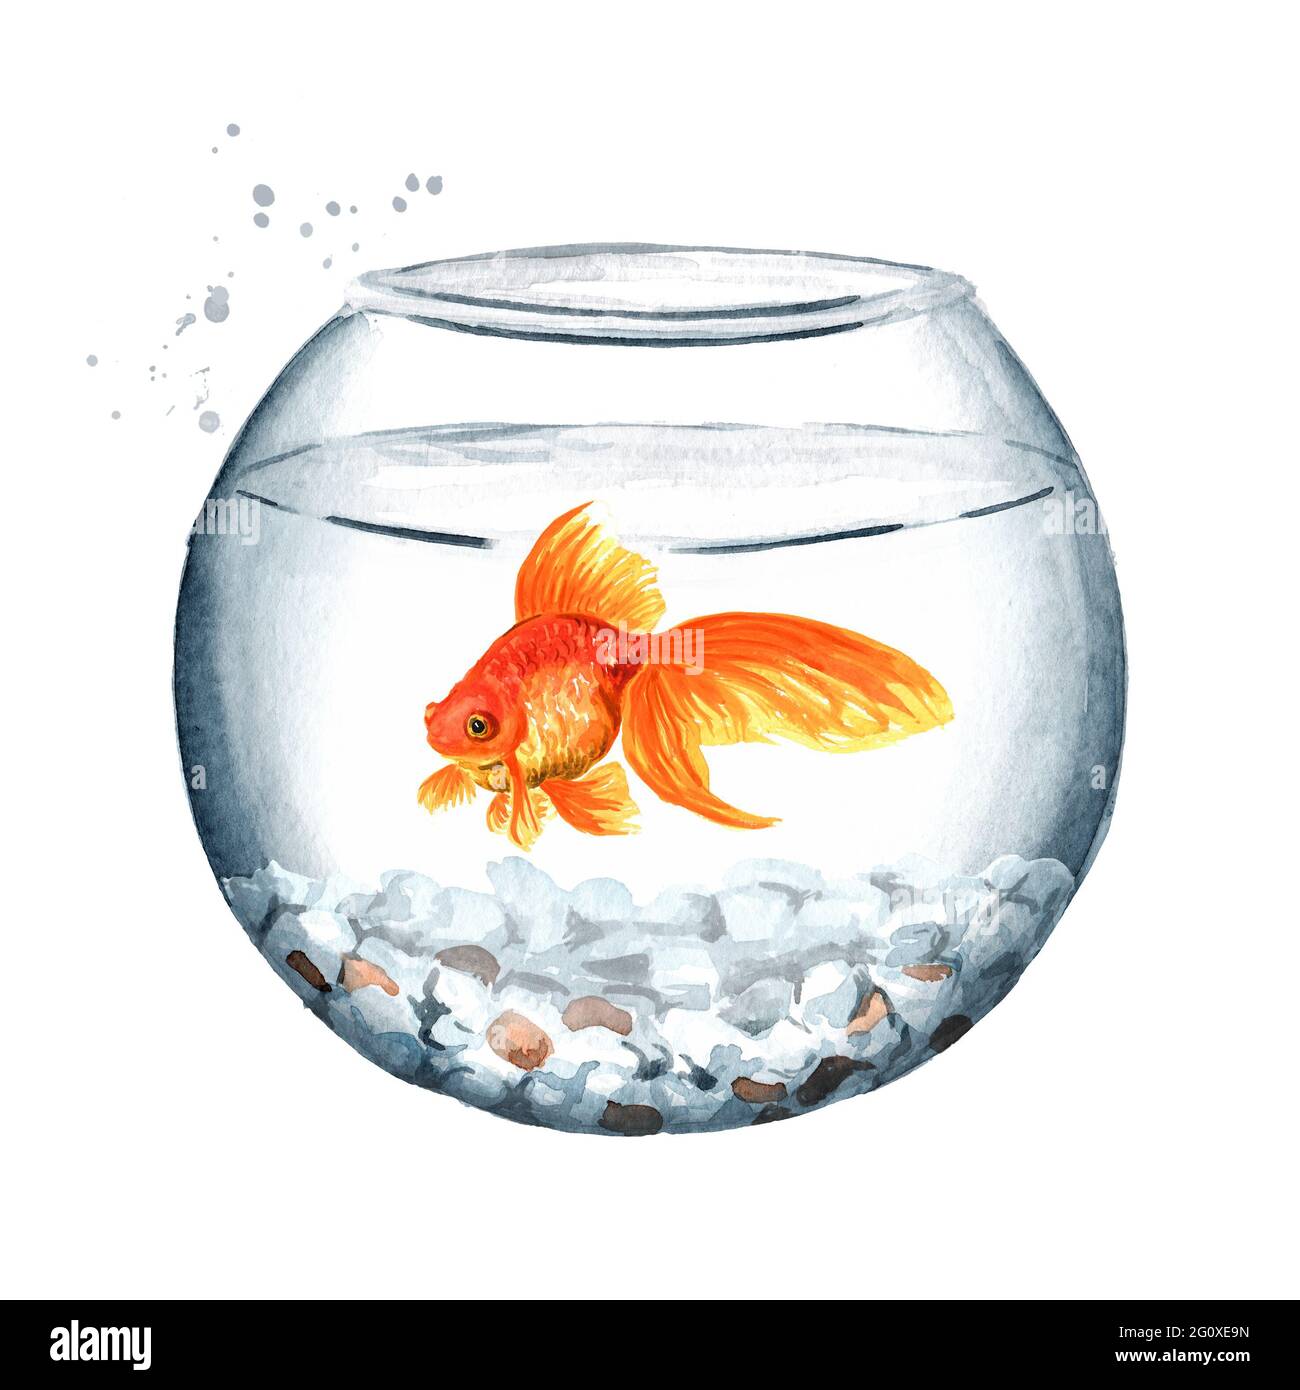 Goldfish swimming in a round glass bowl. Watercolor hand drawn